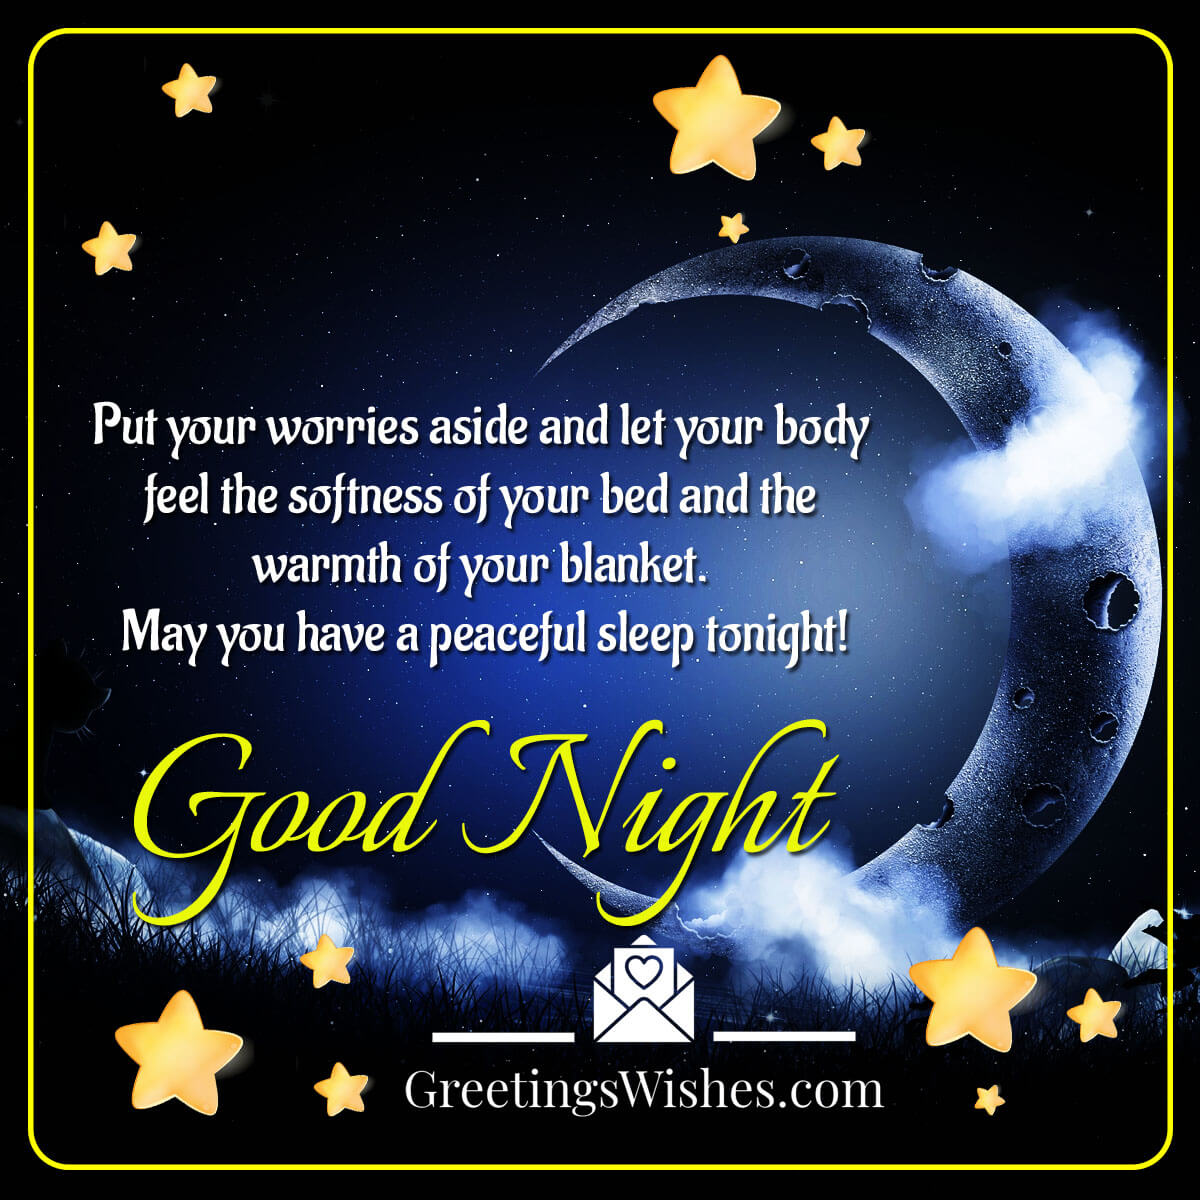 Good Night Wishes - Greetings Wishes